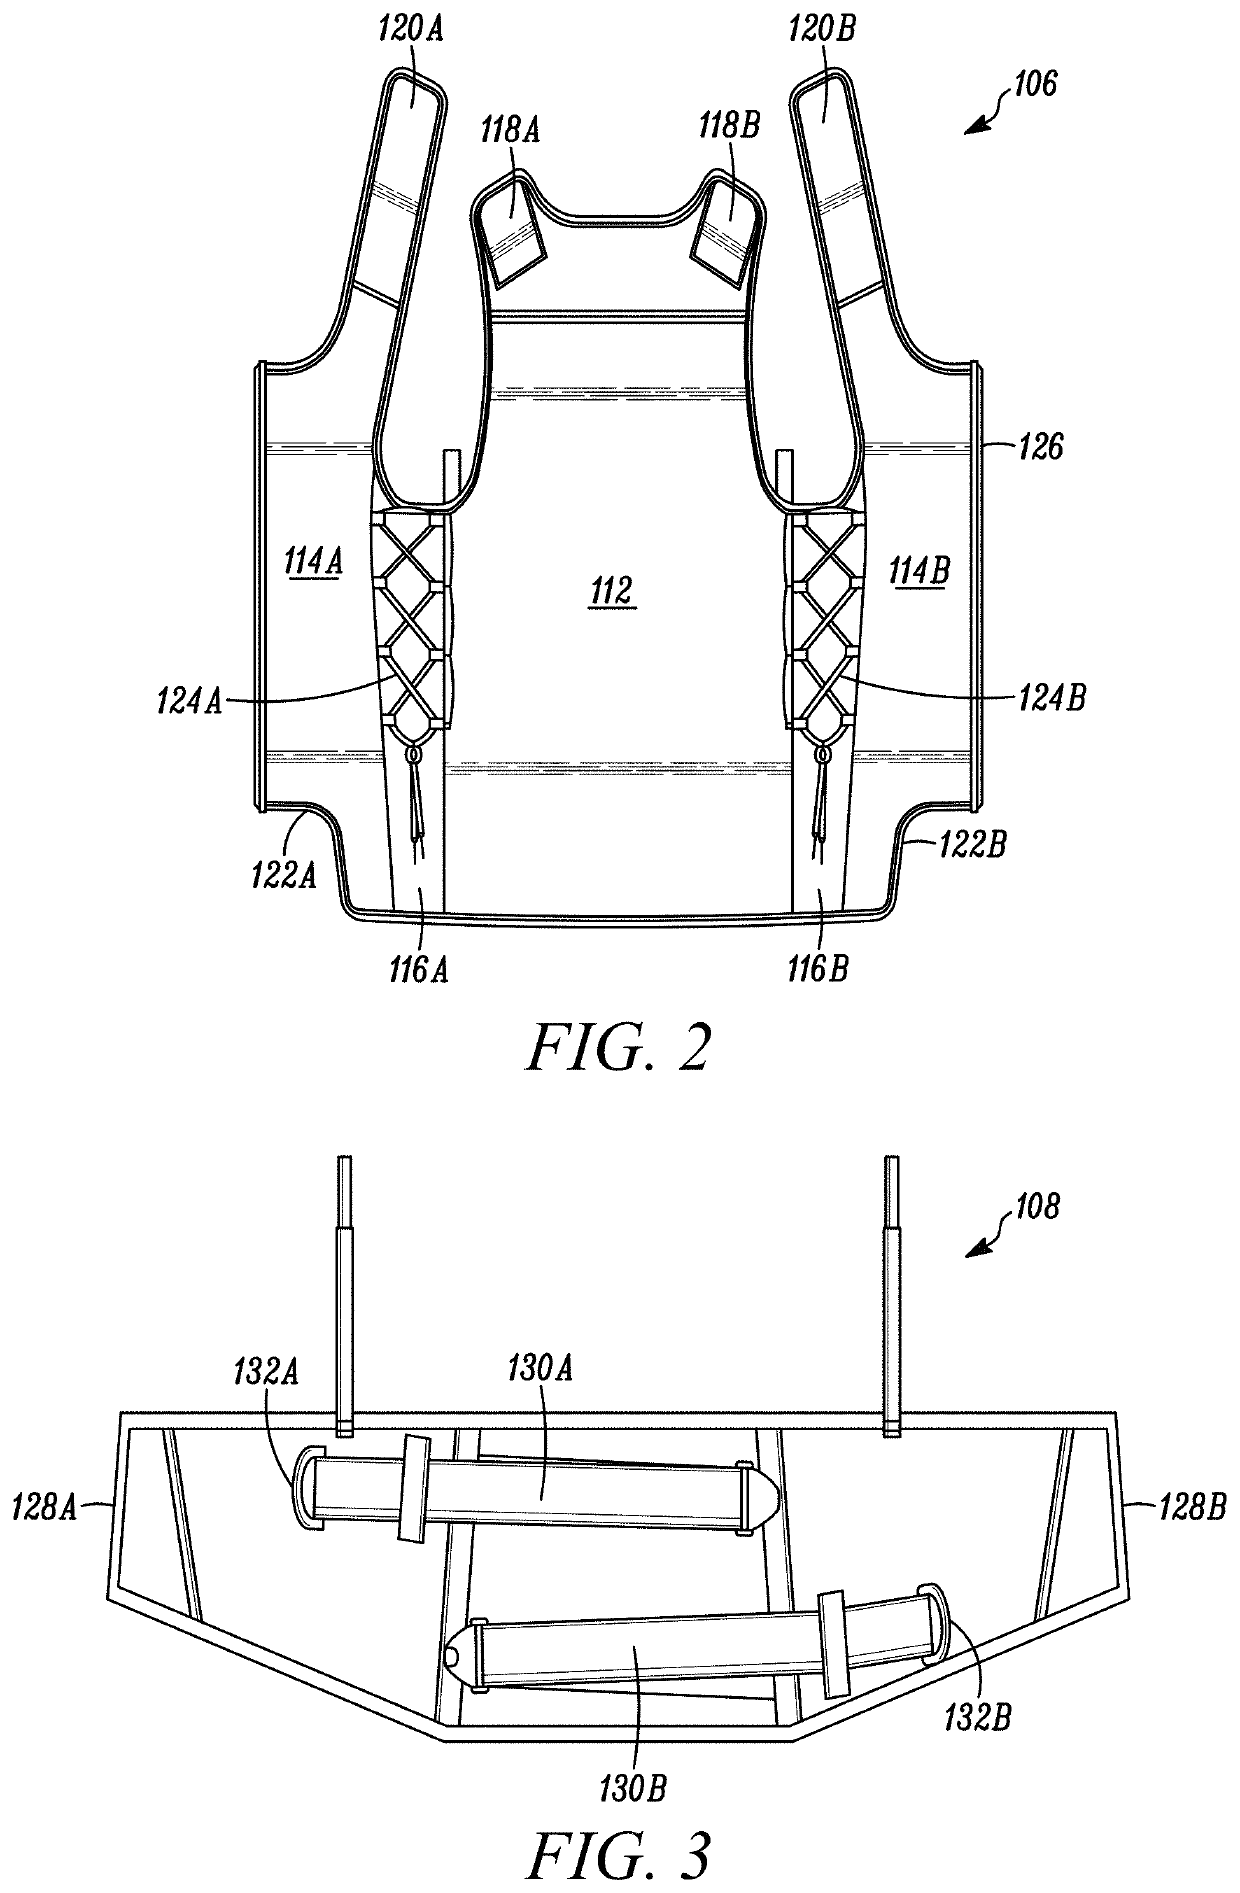 Upper torso wearable orthotic device with dynamic leveling system